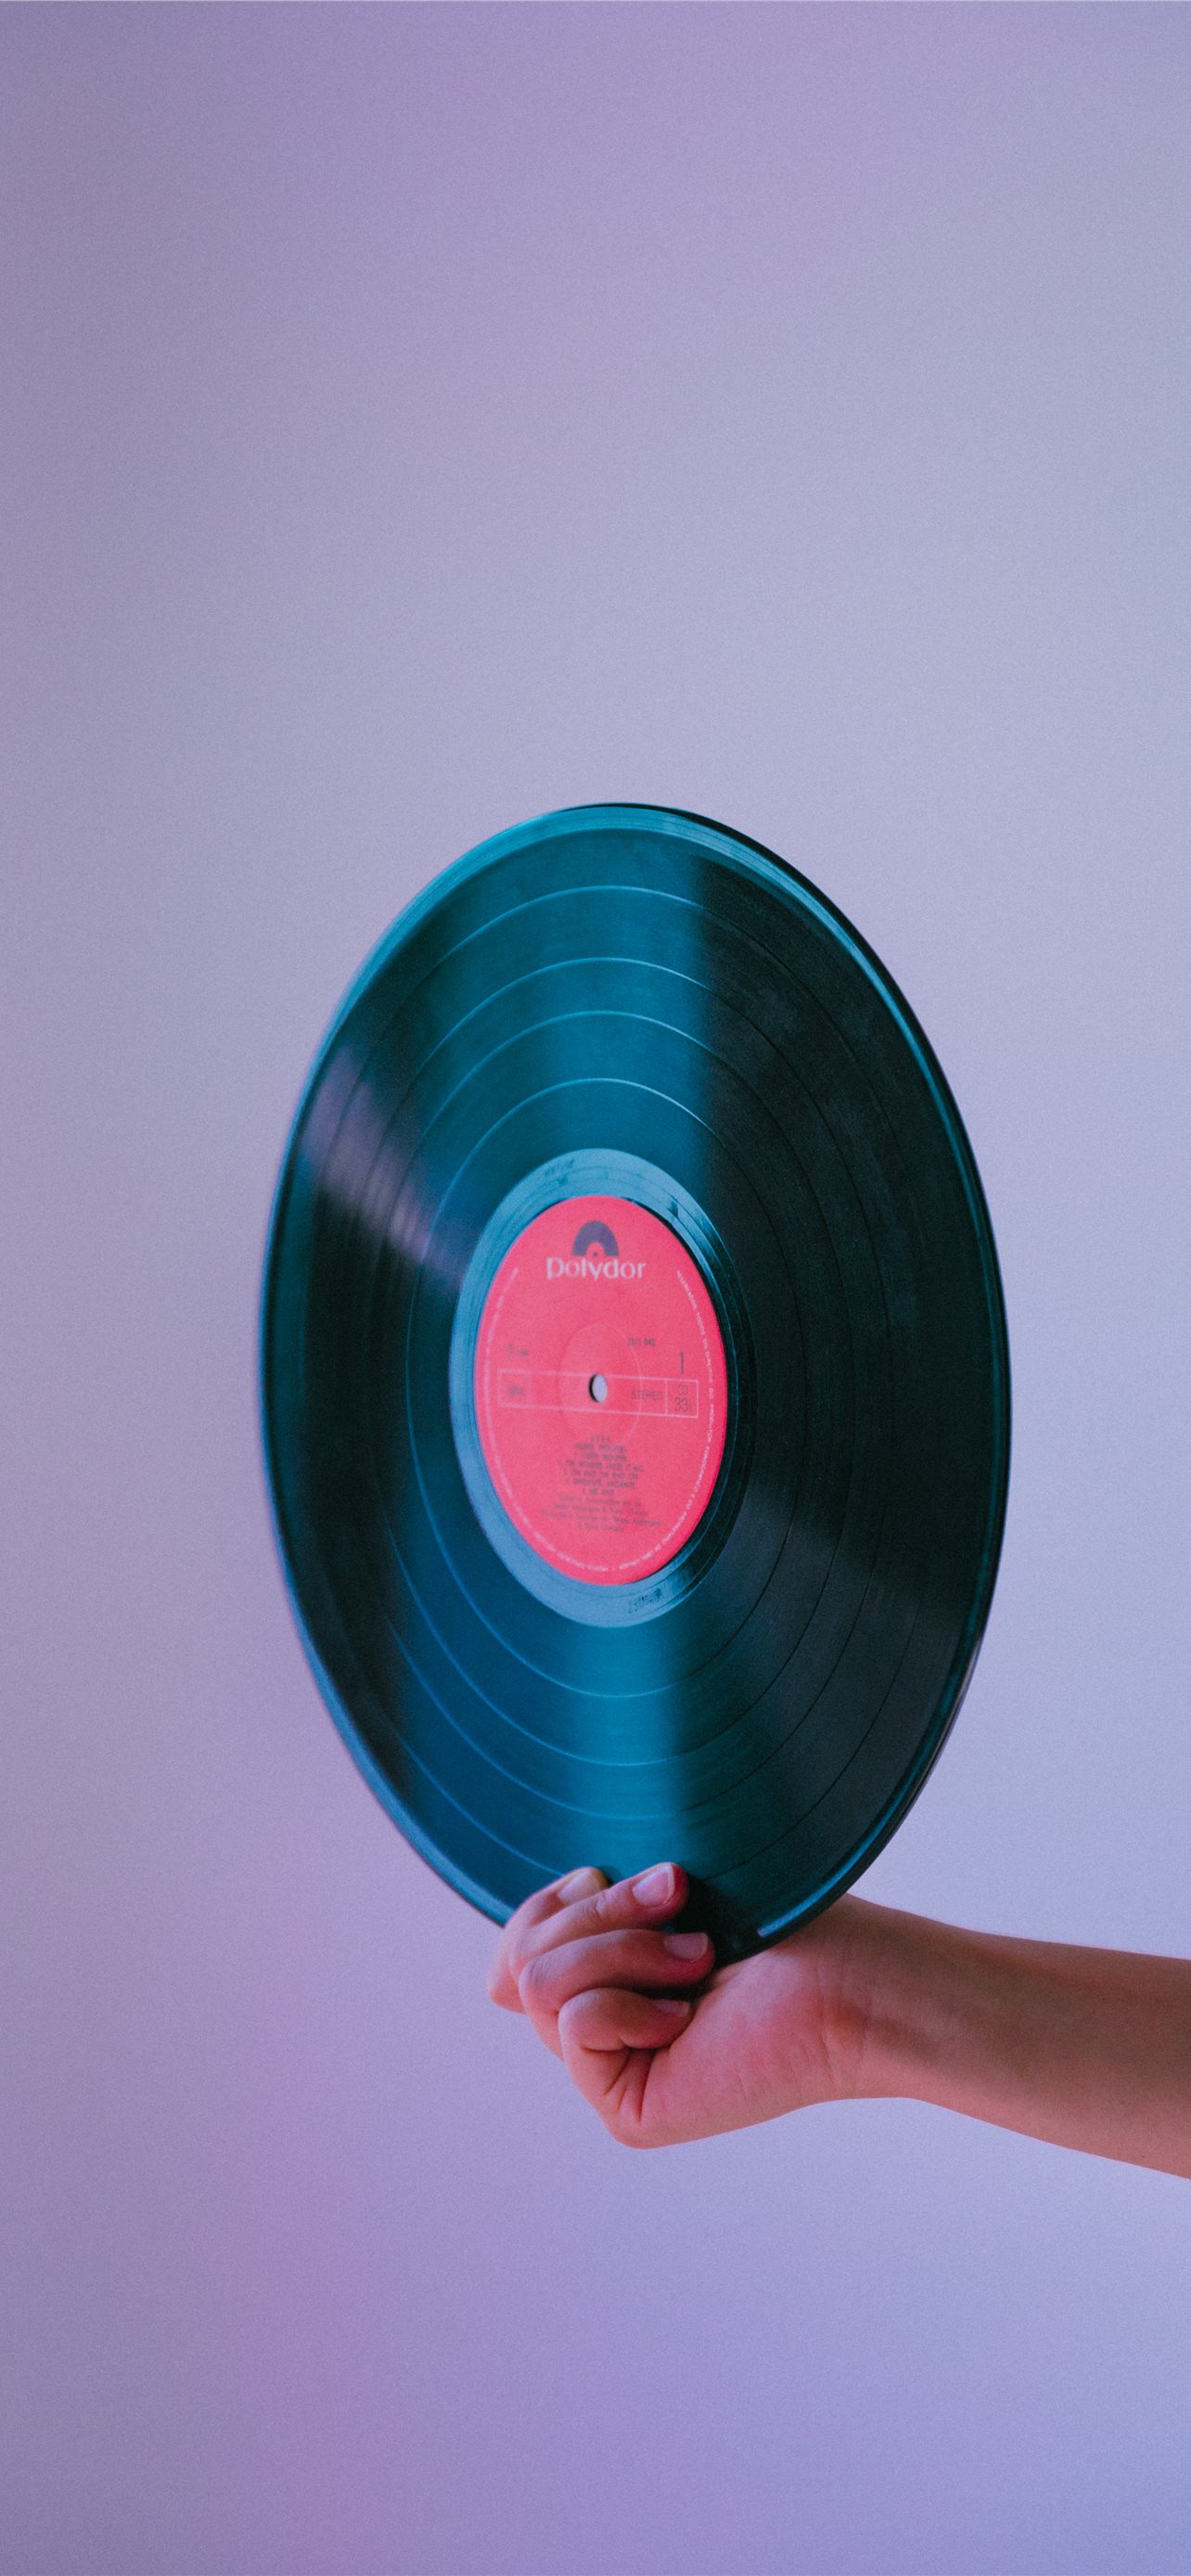 person holding vinyl record iPhone wallpaper 